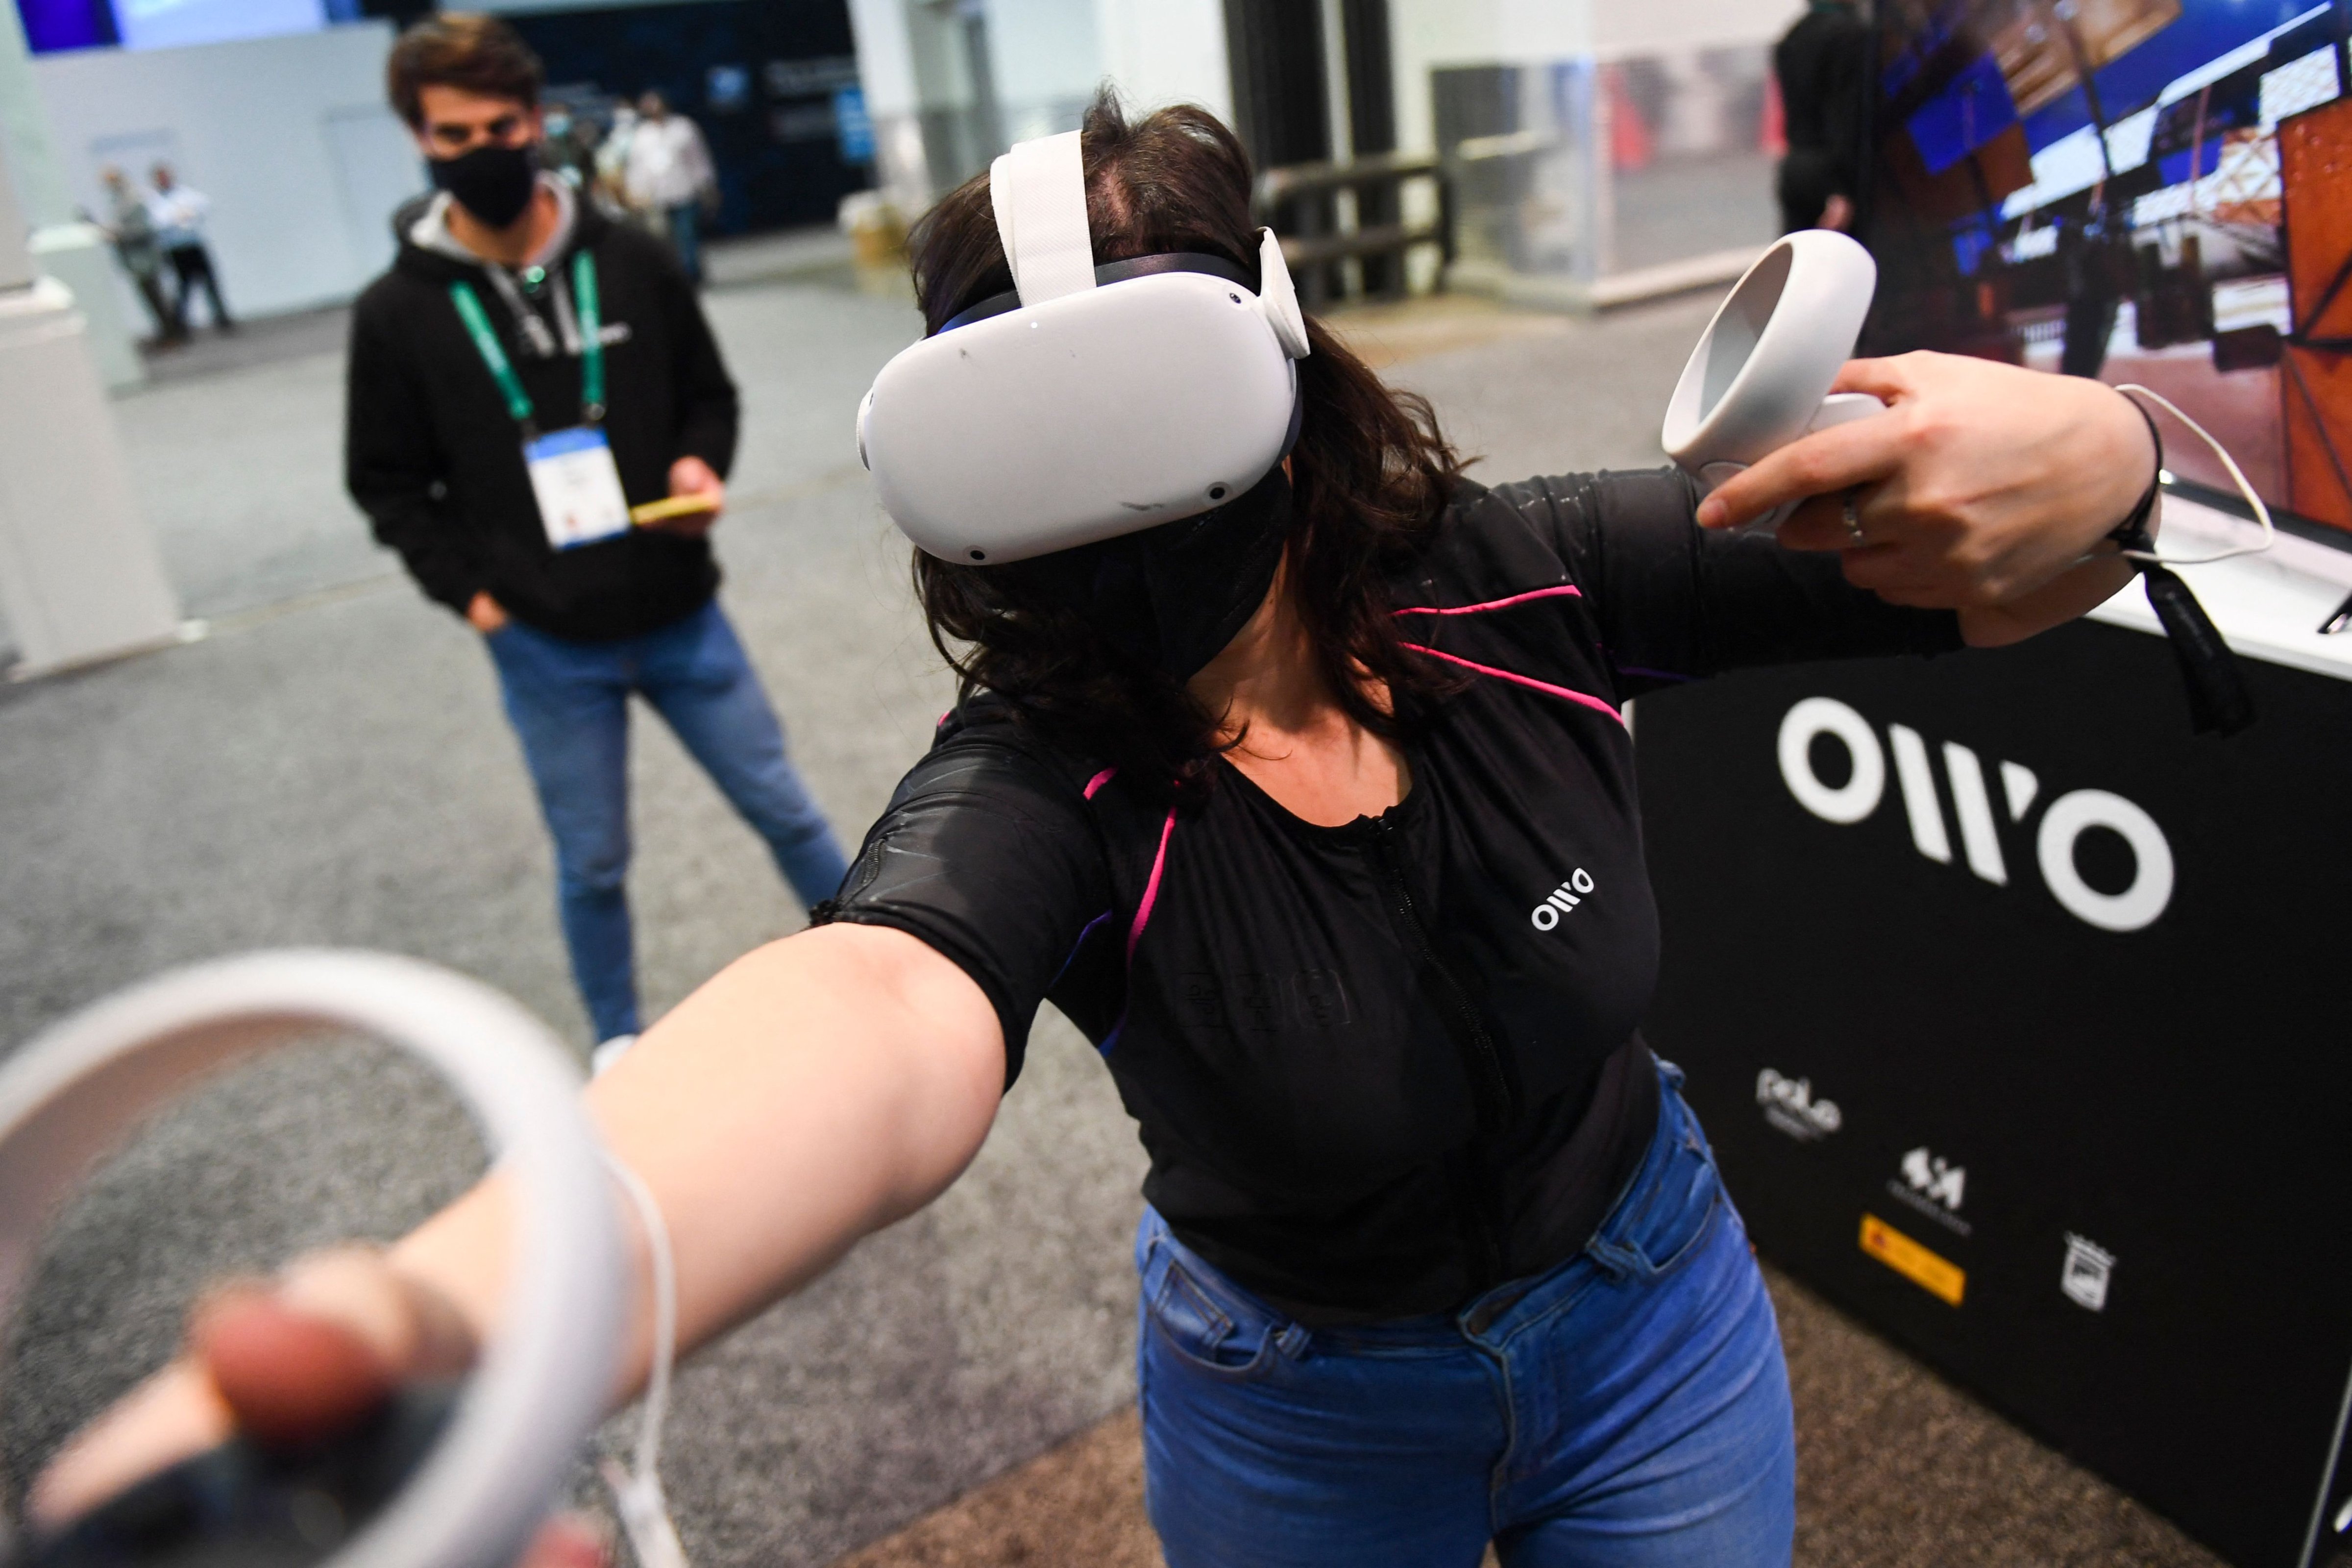 An attendee tries out the Owo vest the 2022 Consumer Electronics Show in Las Vegas, Nevada. (Patrick T. Fallon/AFP via Getty Images))